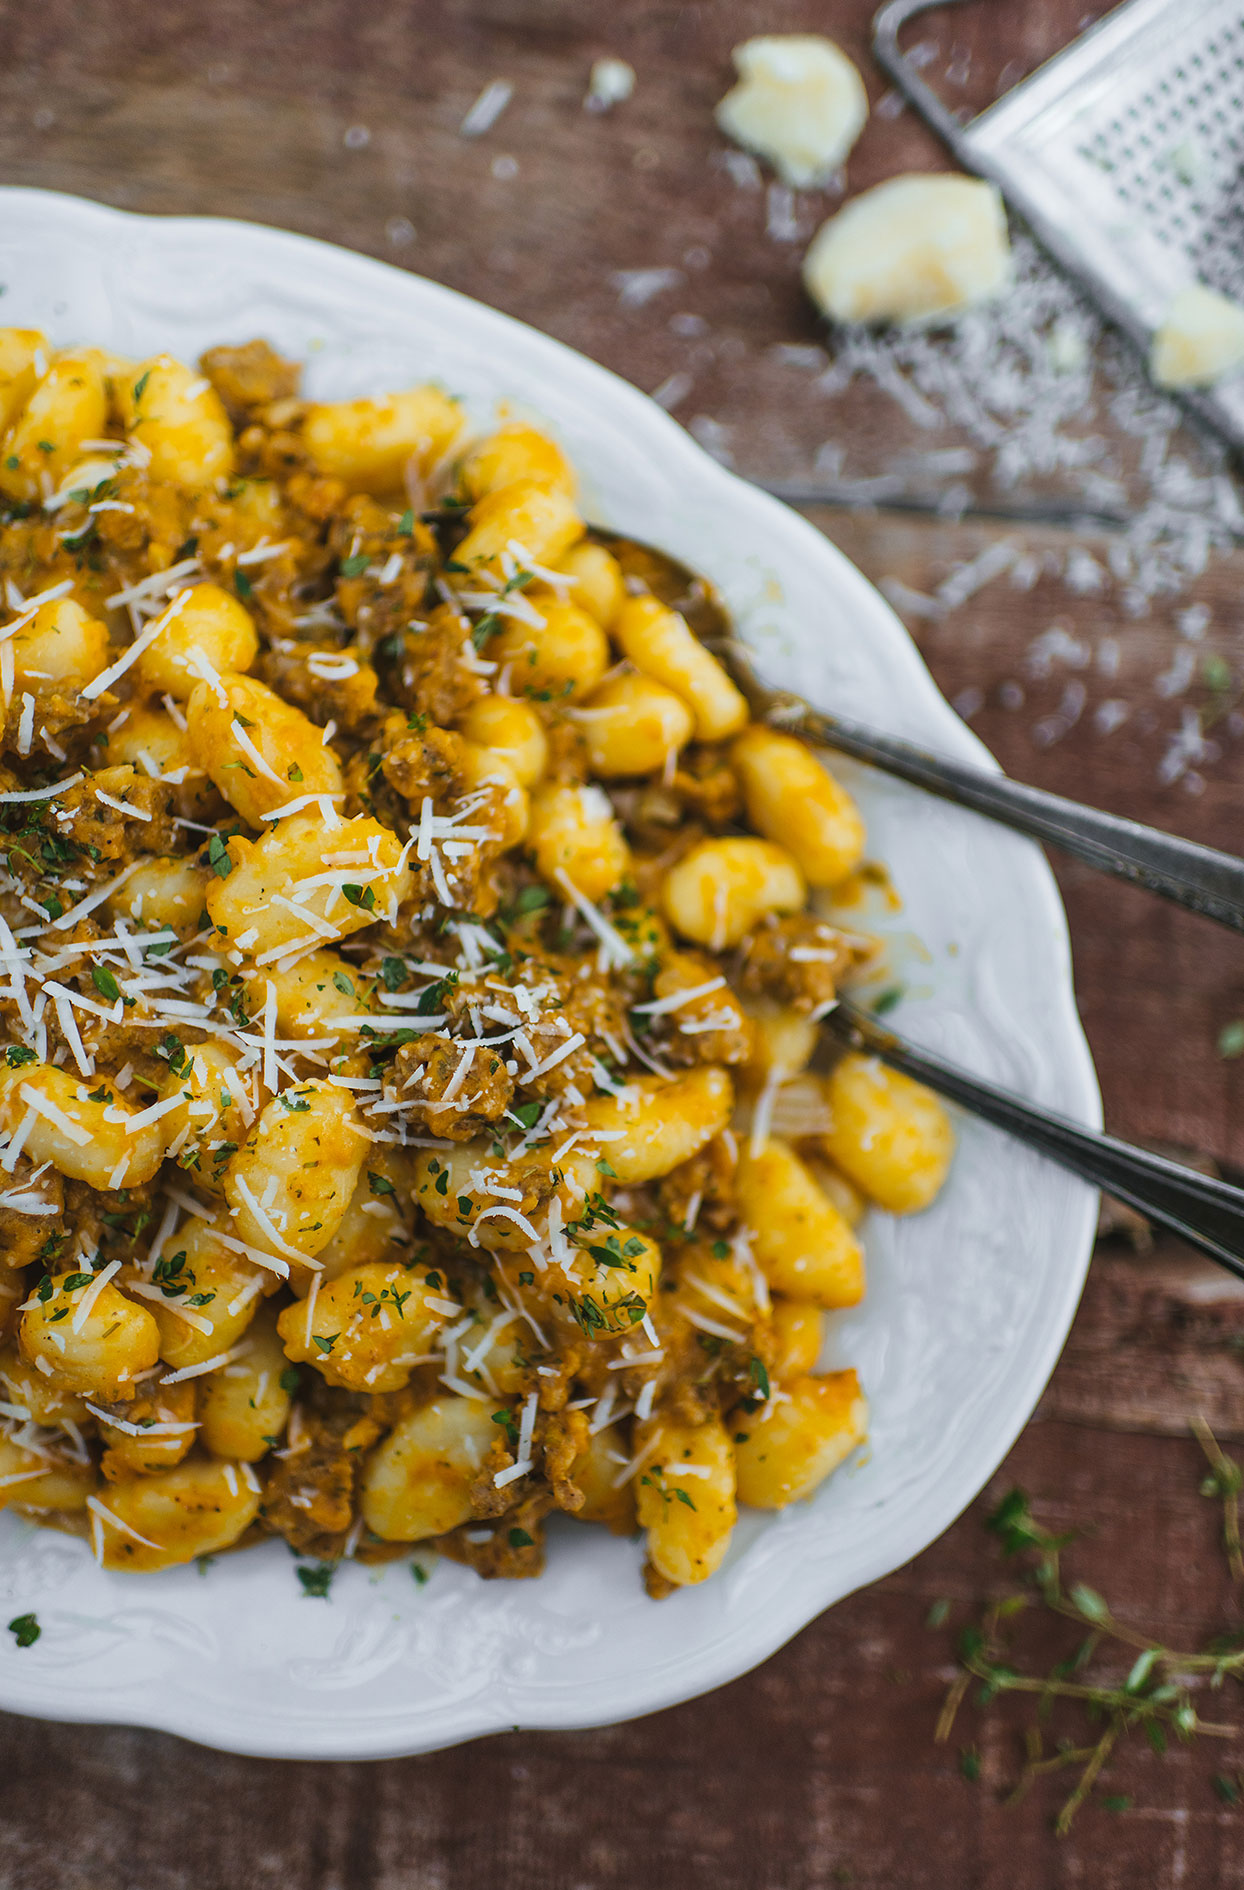 Gnocchi with pumpkin and fine herbs sausages